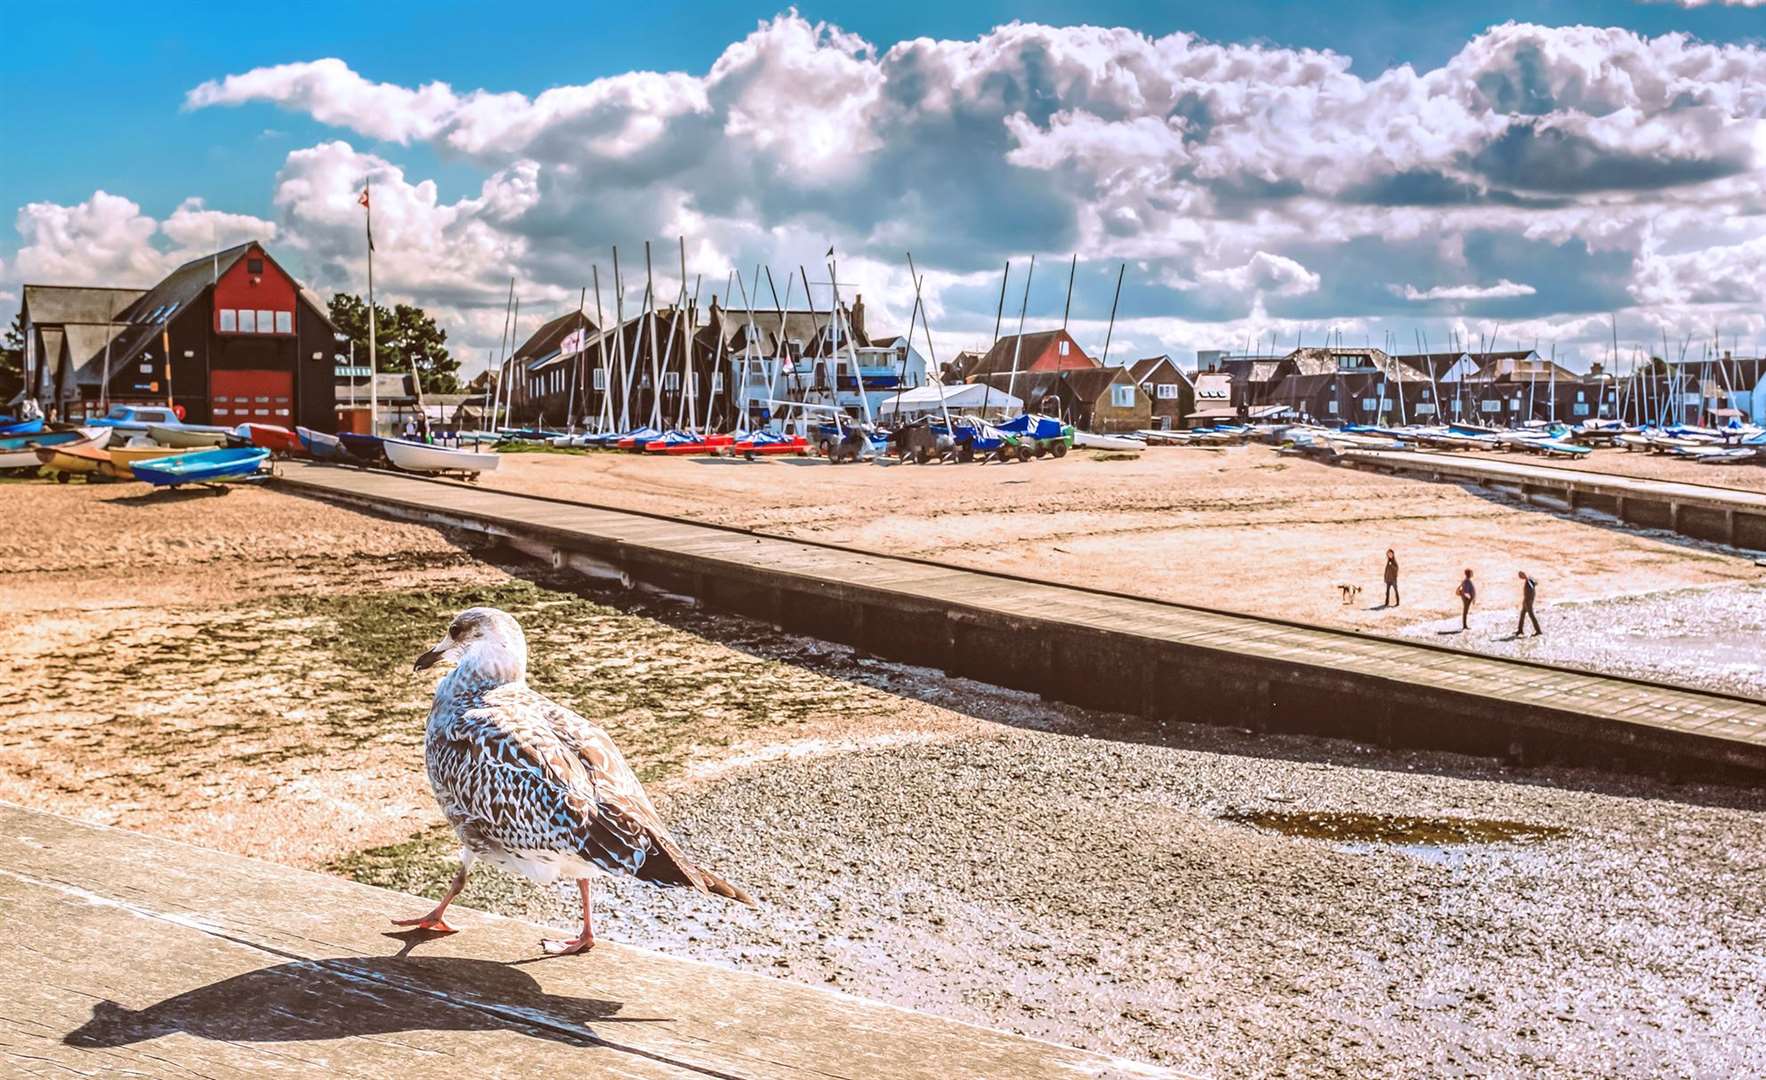 Head to Whitstable for Oyster Festival fun this weekend